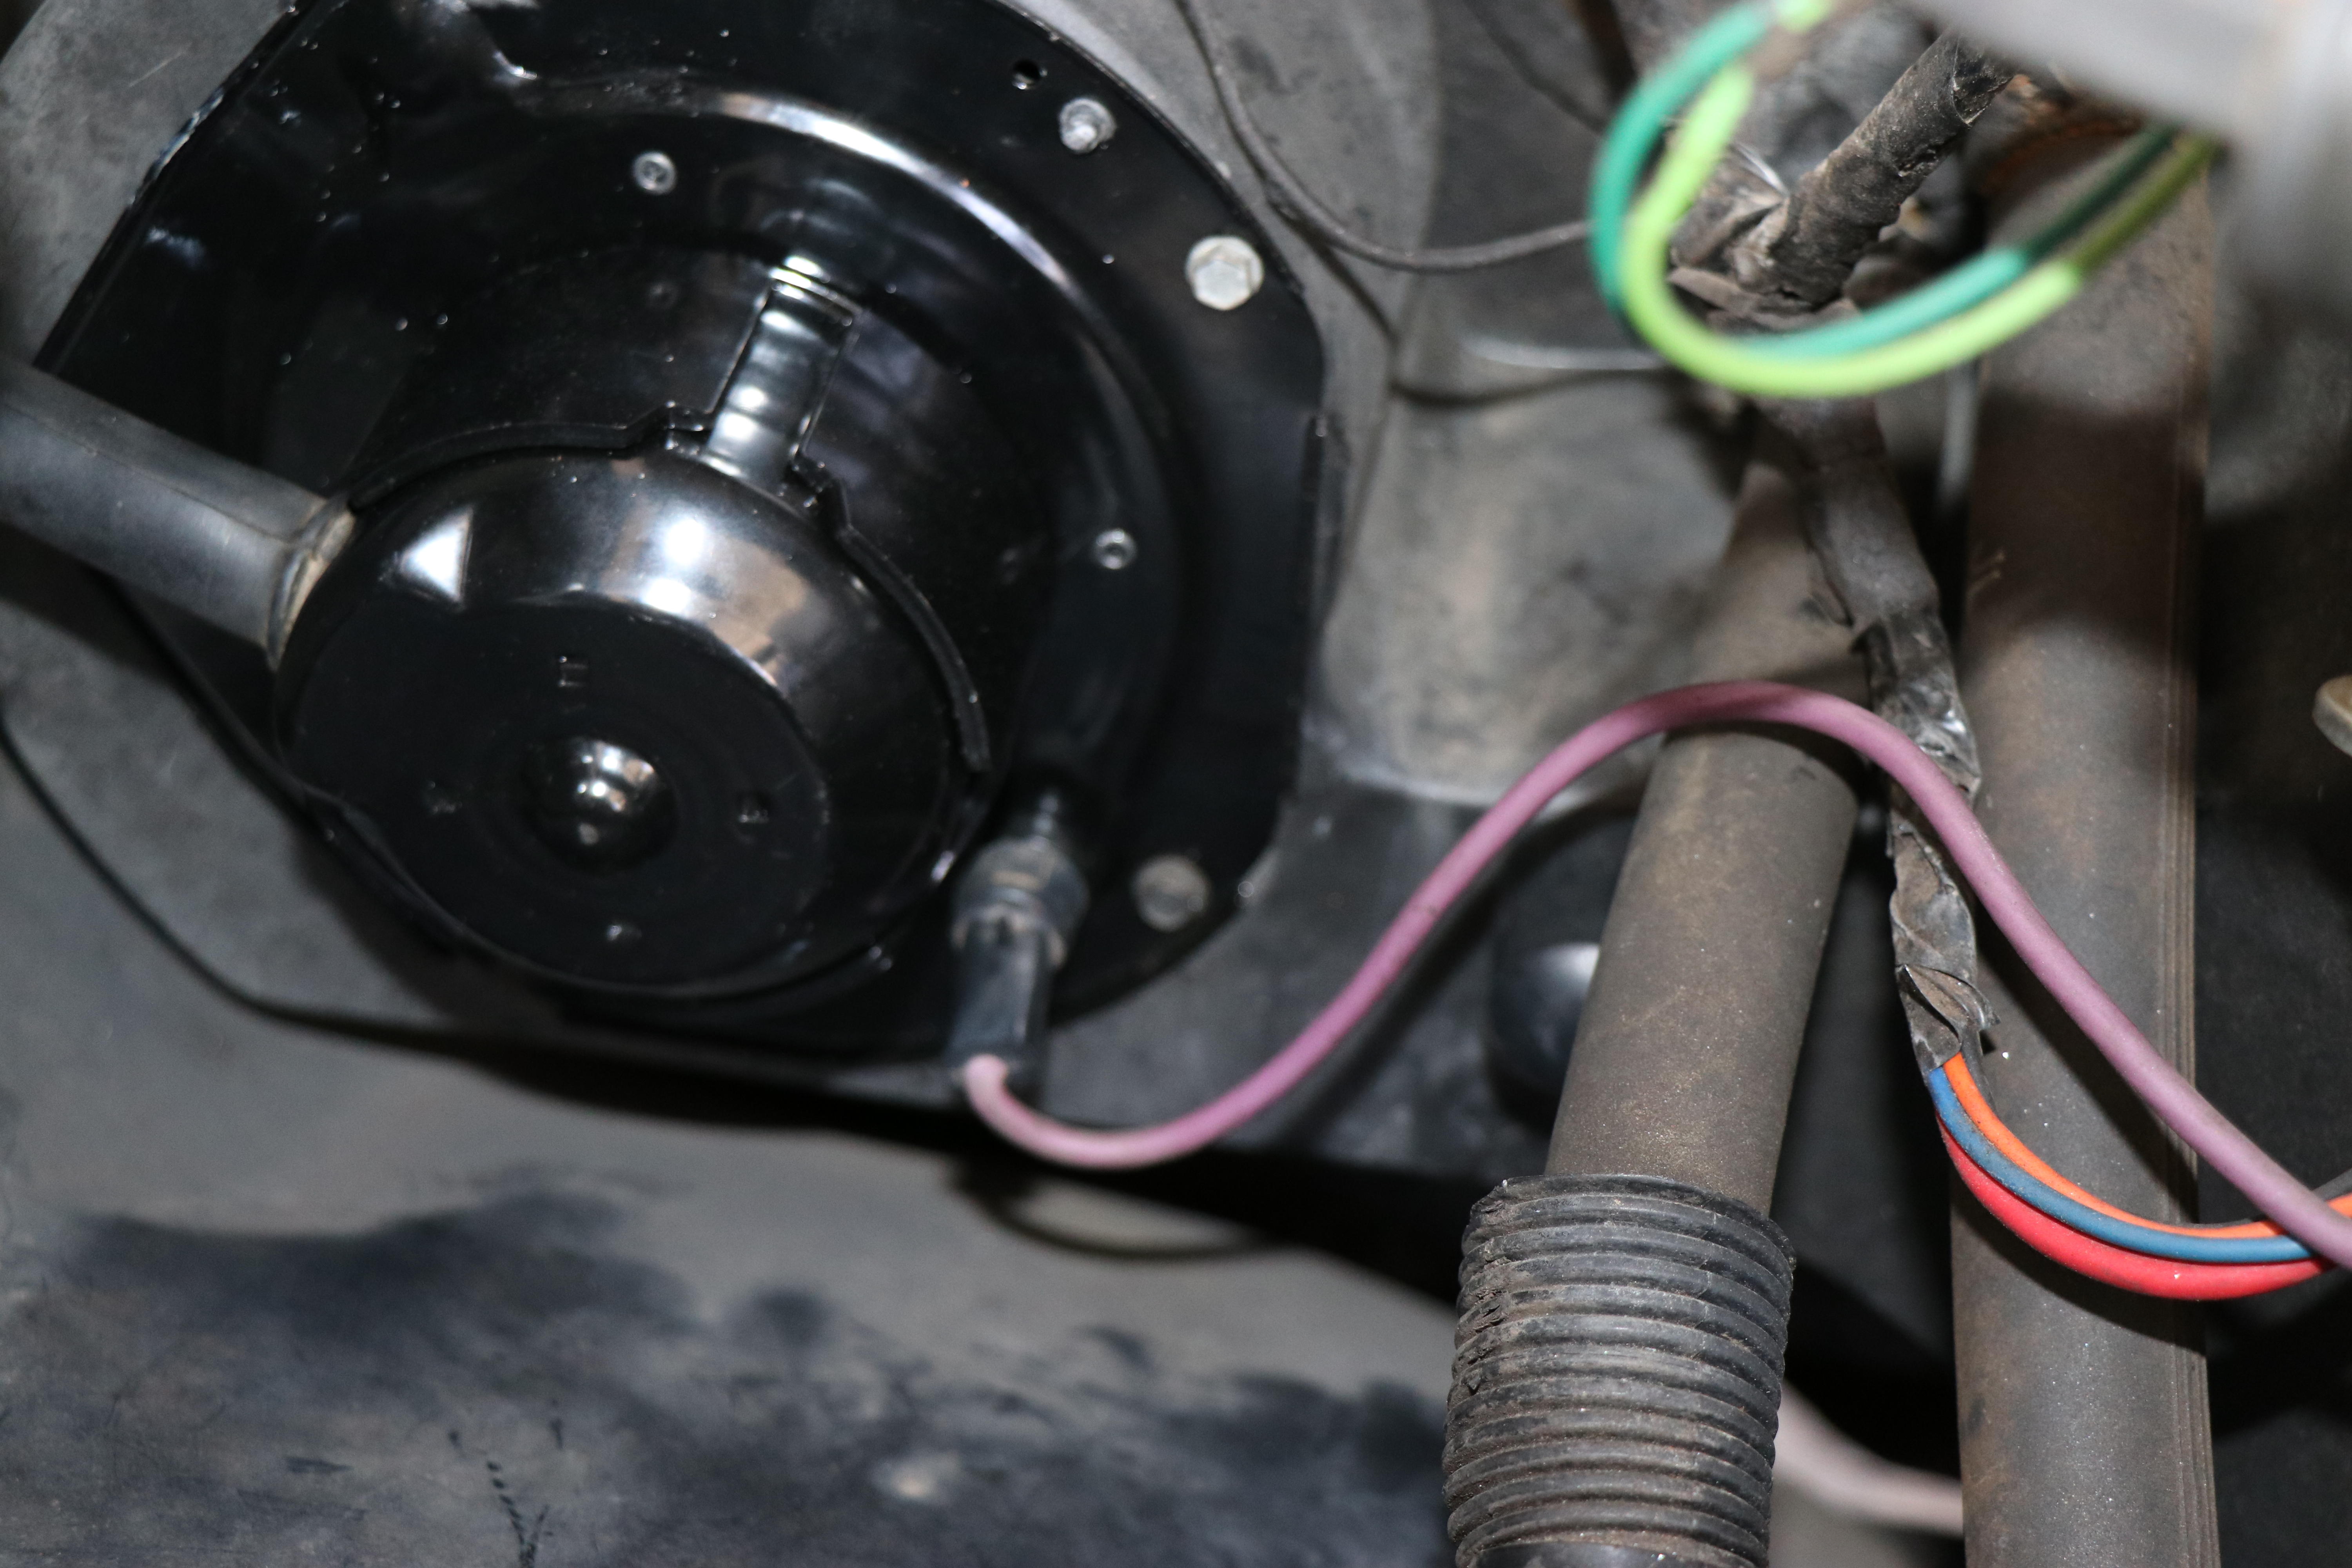 Pink power cord that provides electric to the blower motor